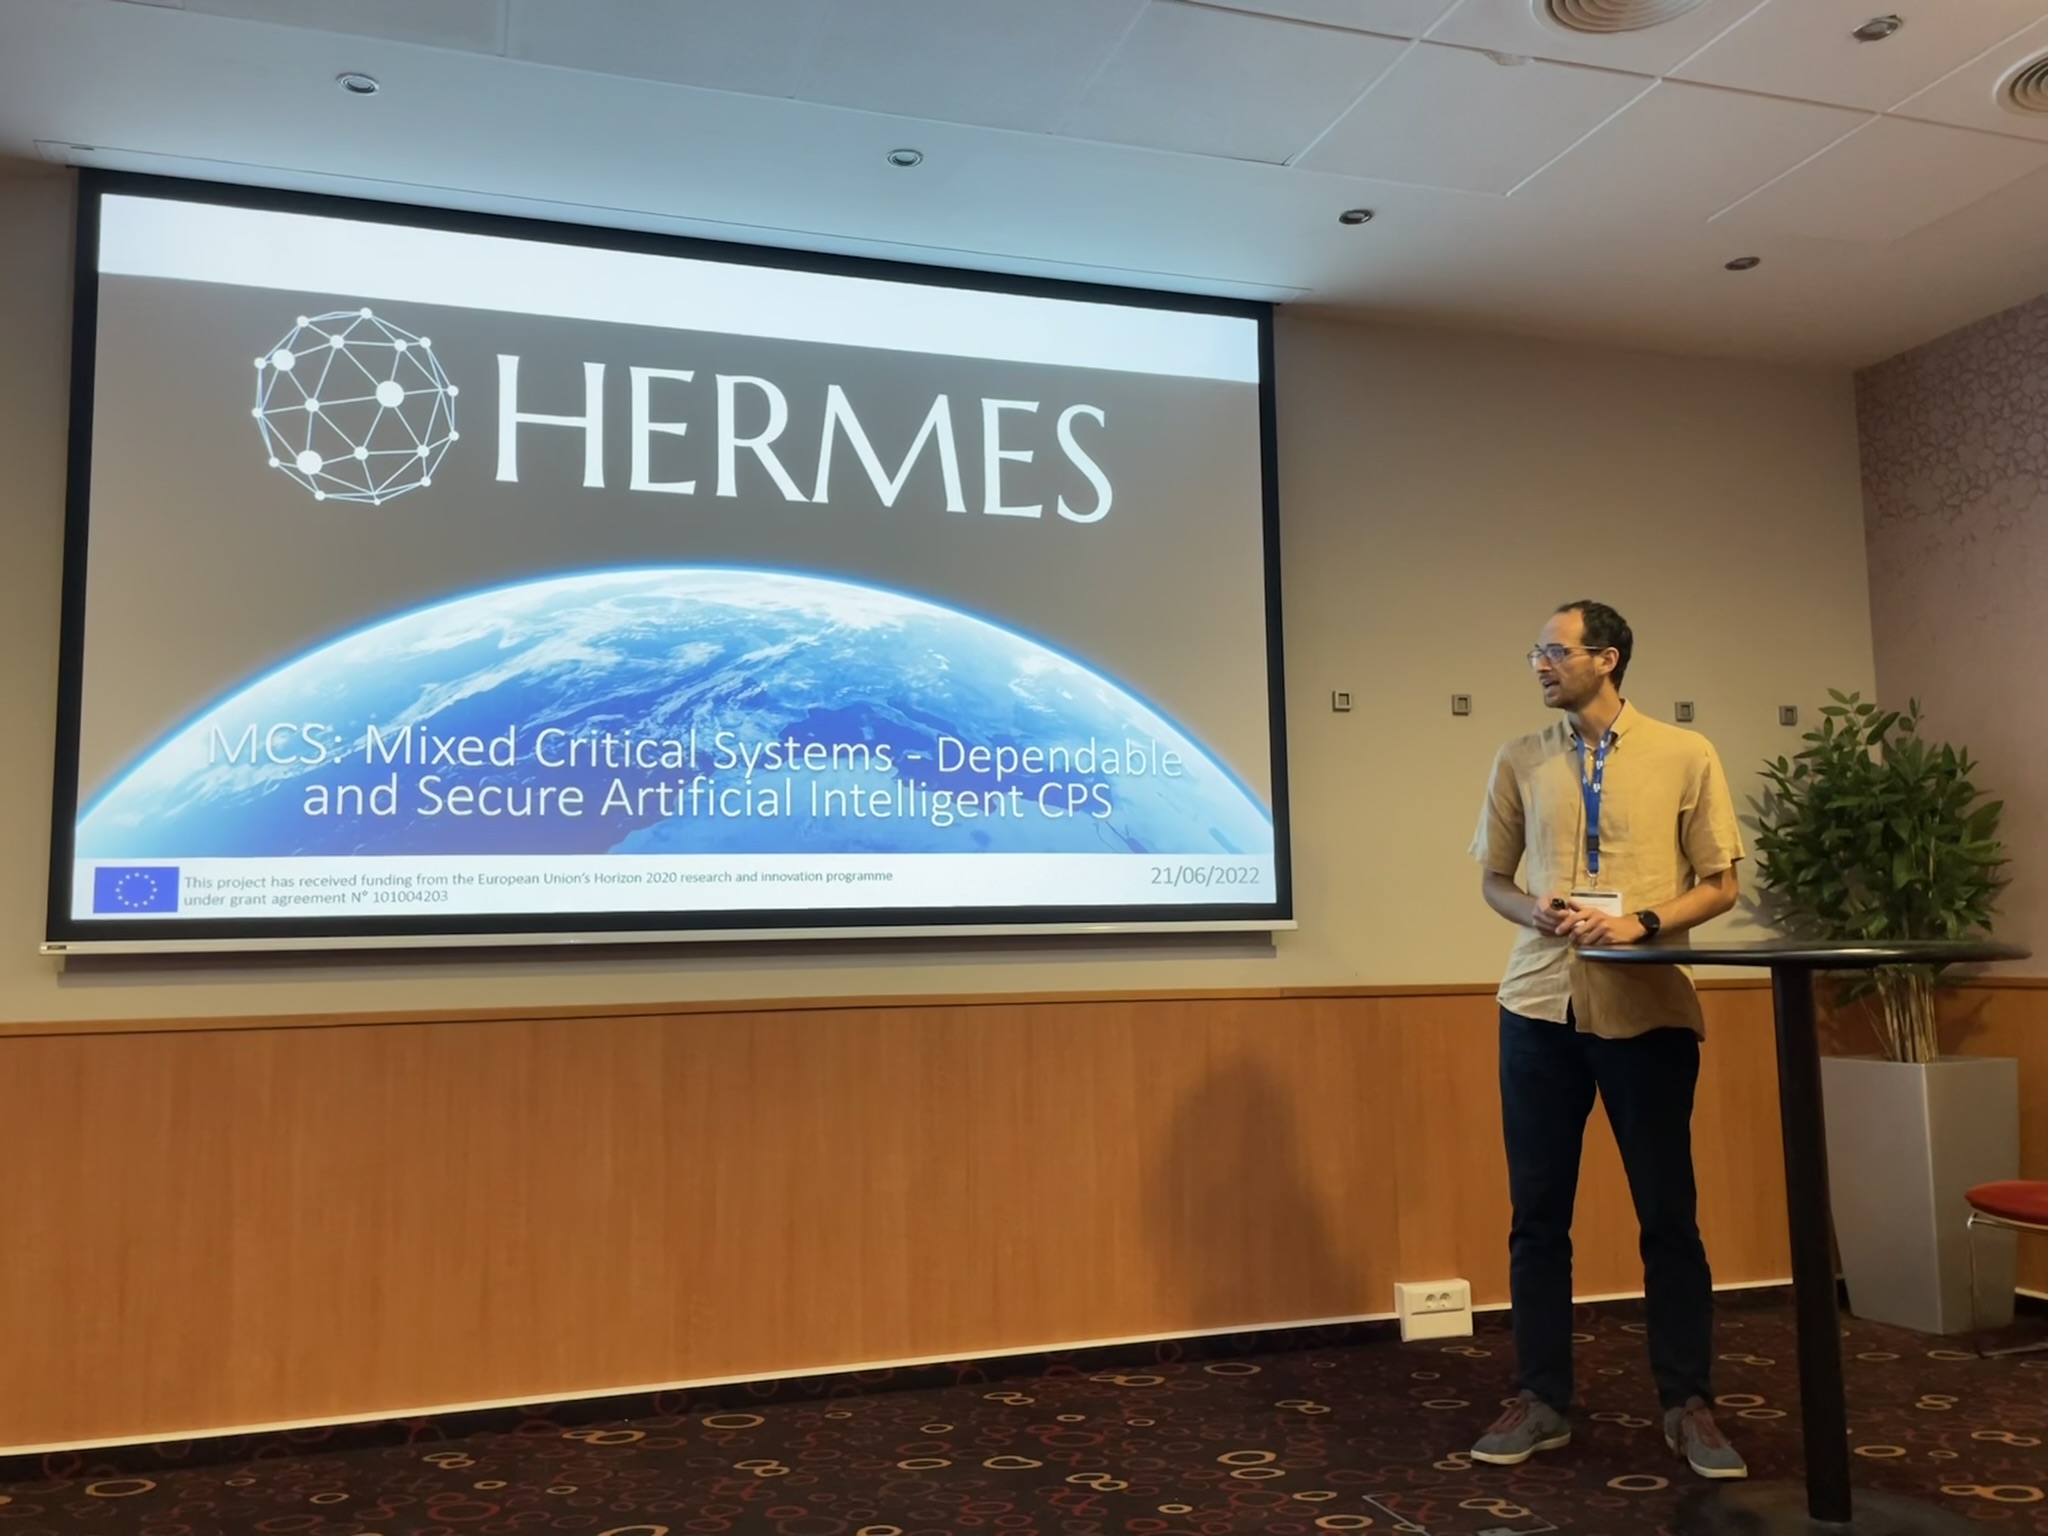 HERMES Project gets presented at HIPEAC 2022